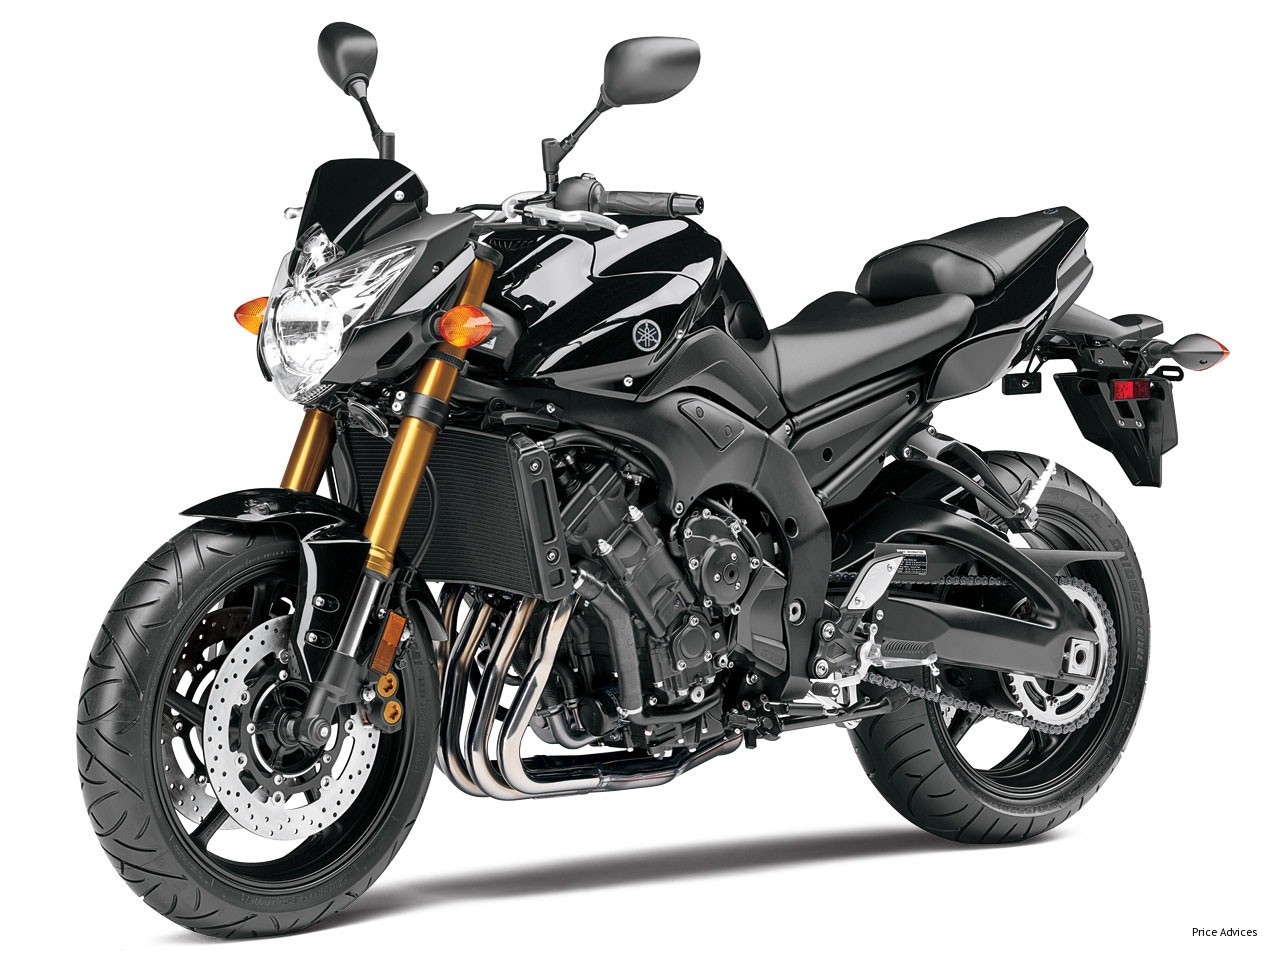 Get Every Thing All New Yamaha Fz 250 Specifications And Price